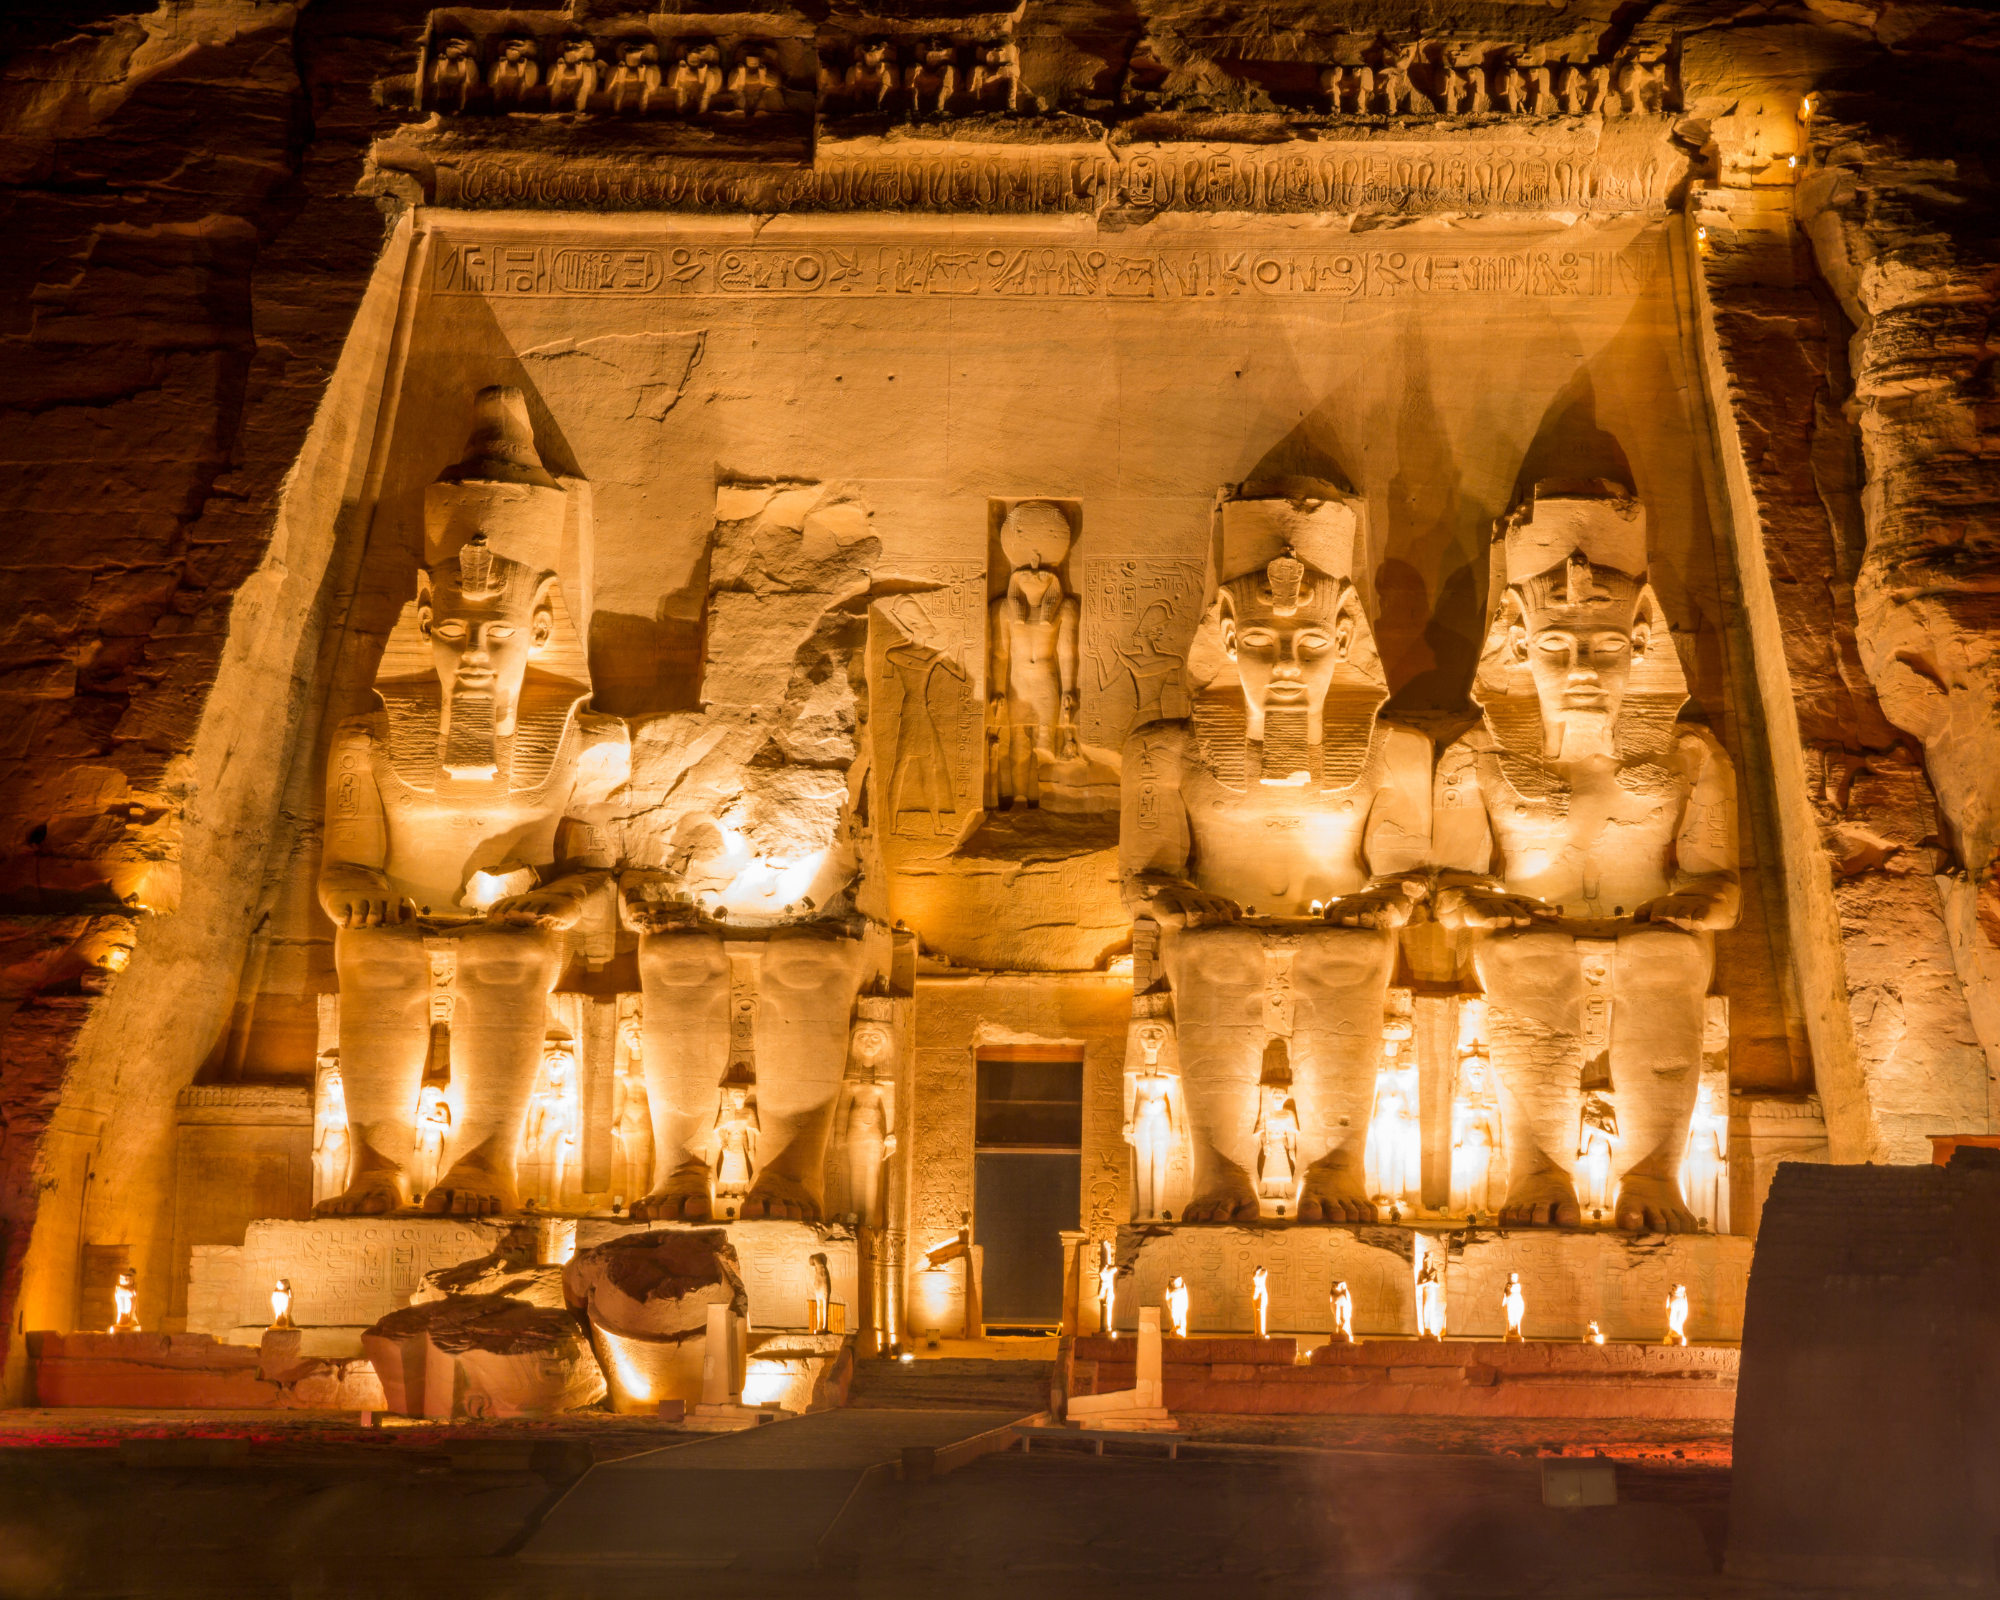 The Temples of Abu Simbel Egypt